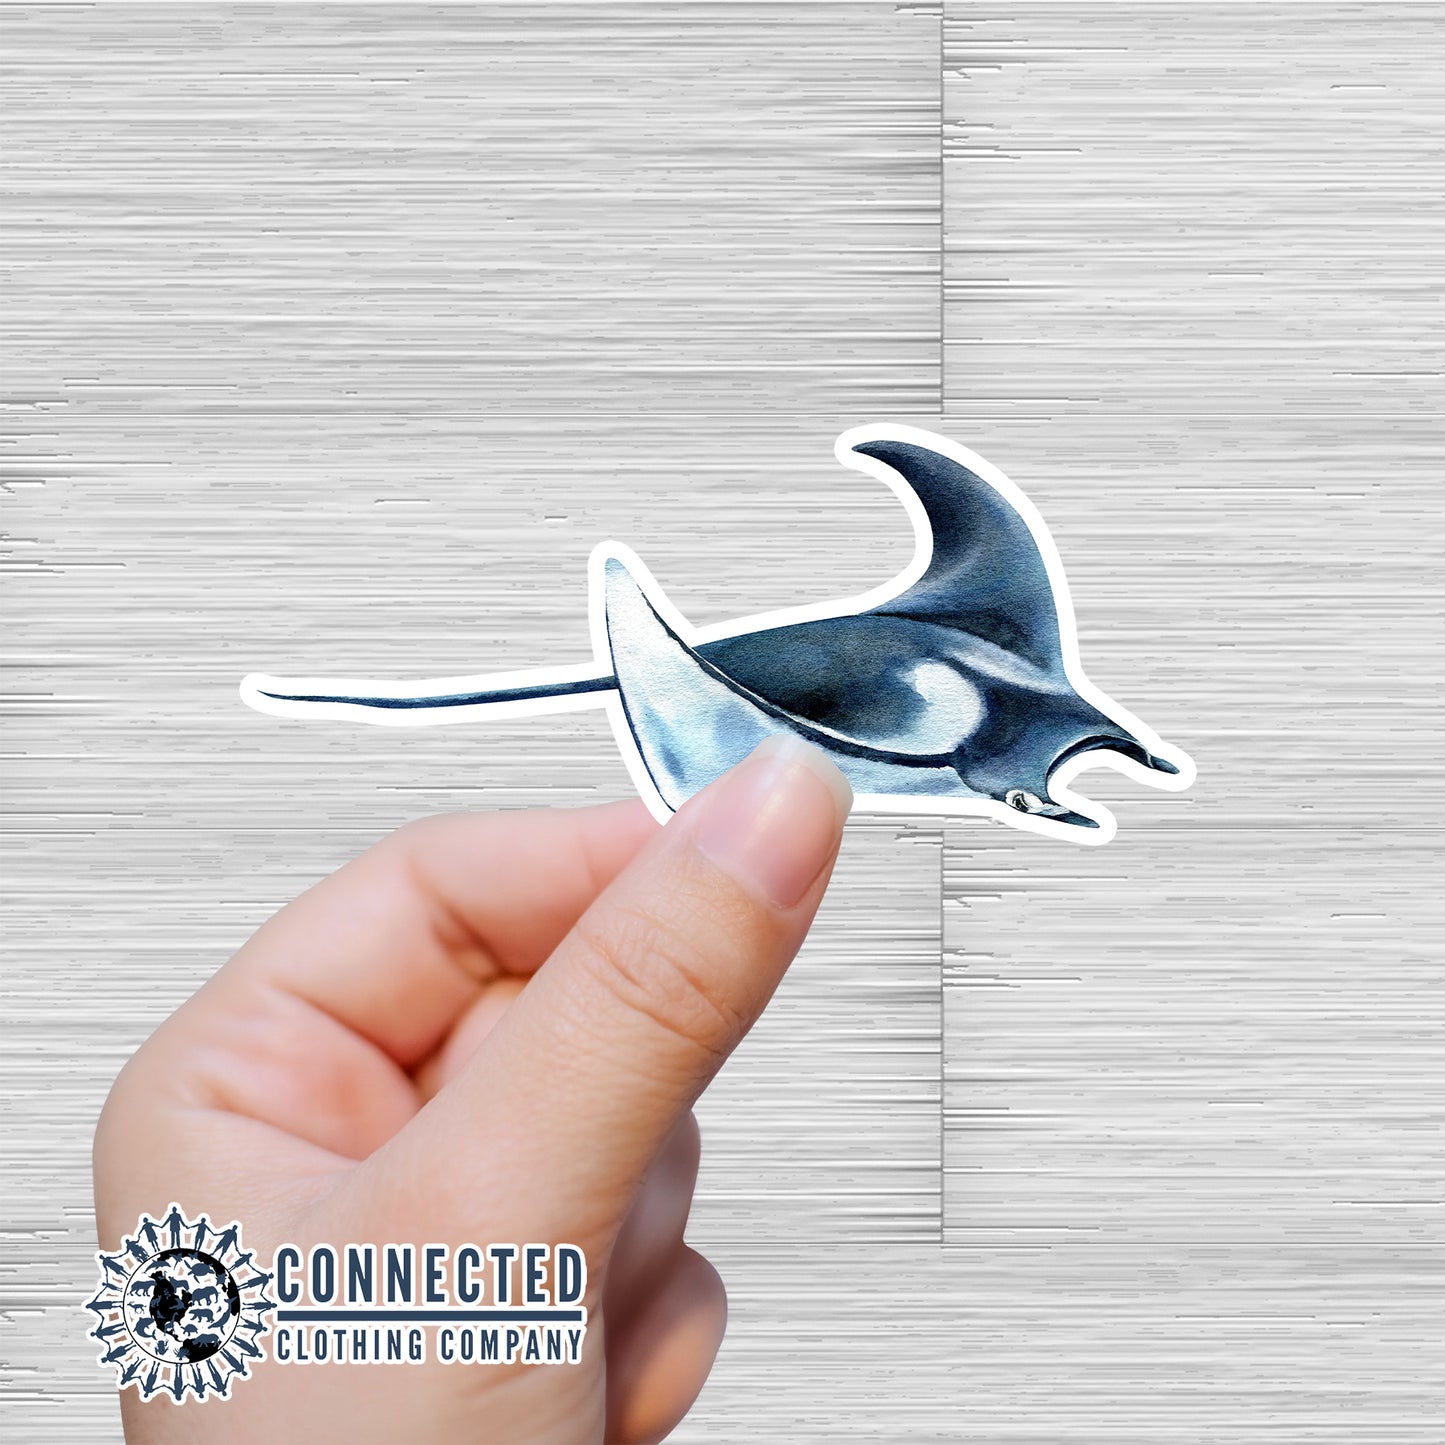 Manta Ray Sticker - Connected Clothing Company - 10% of proceeds donated to ocean conservation